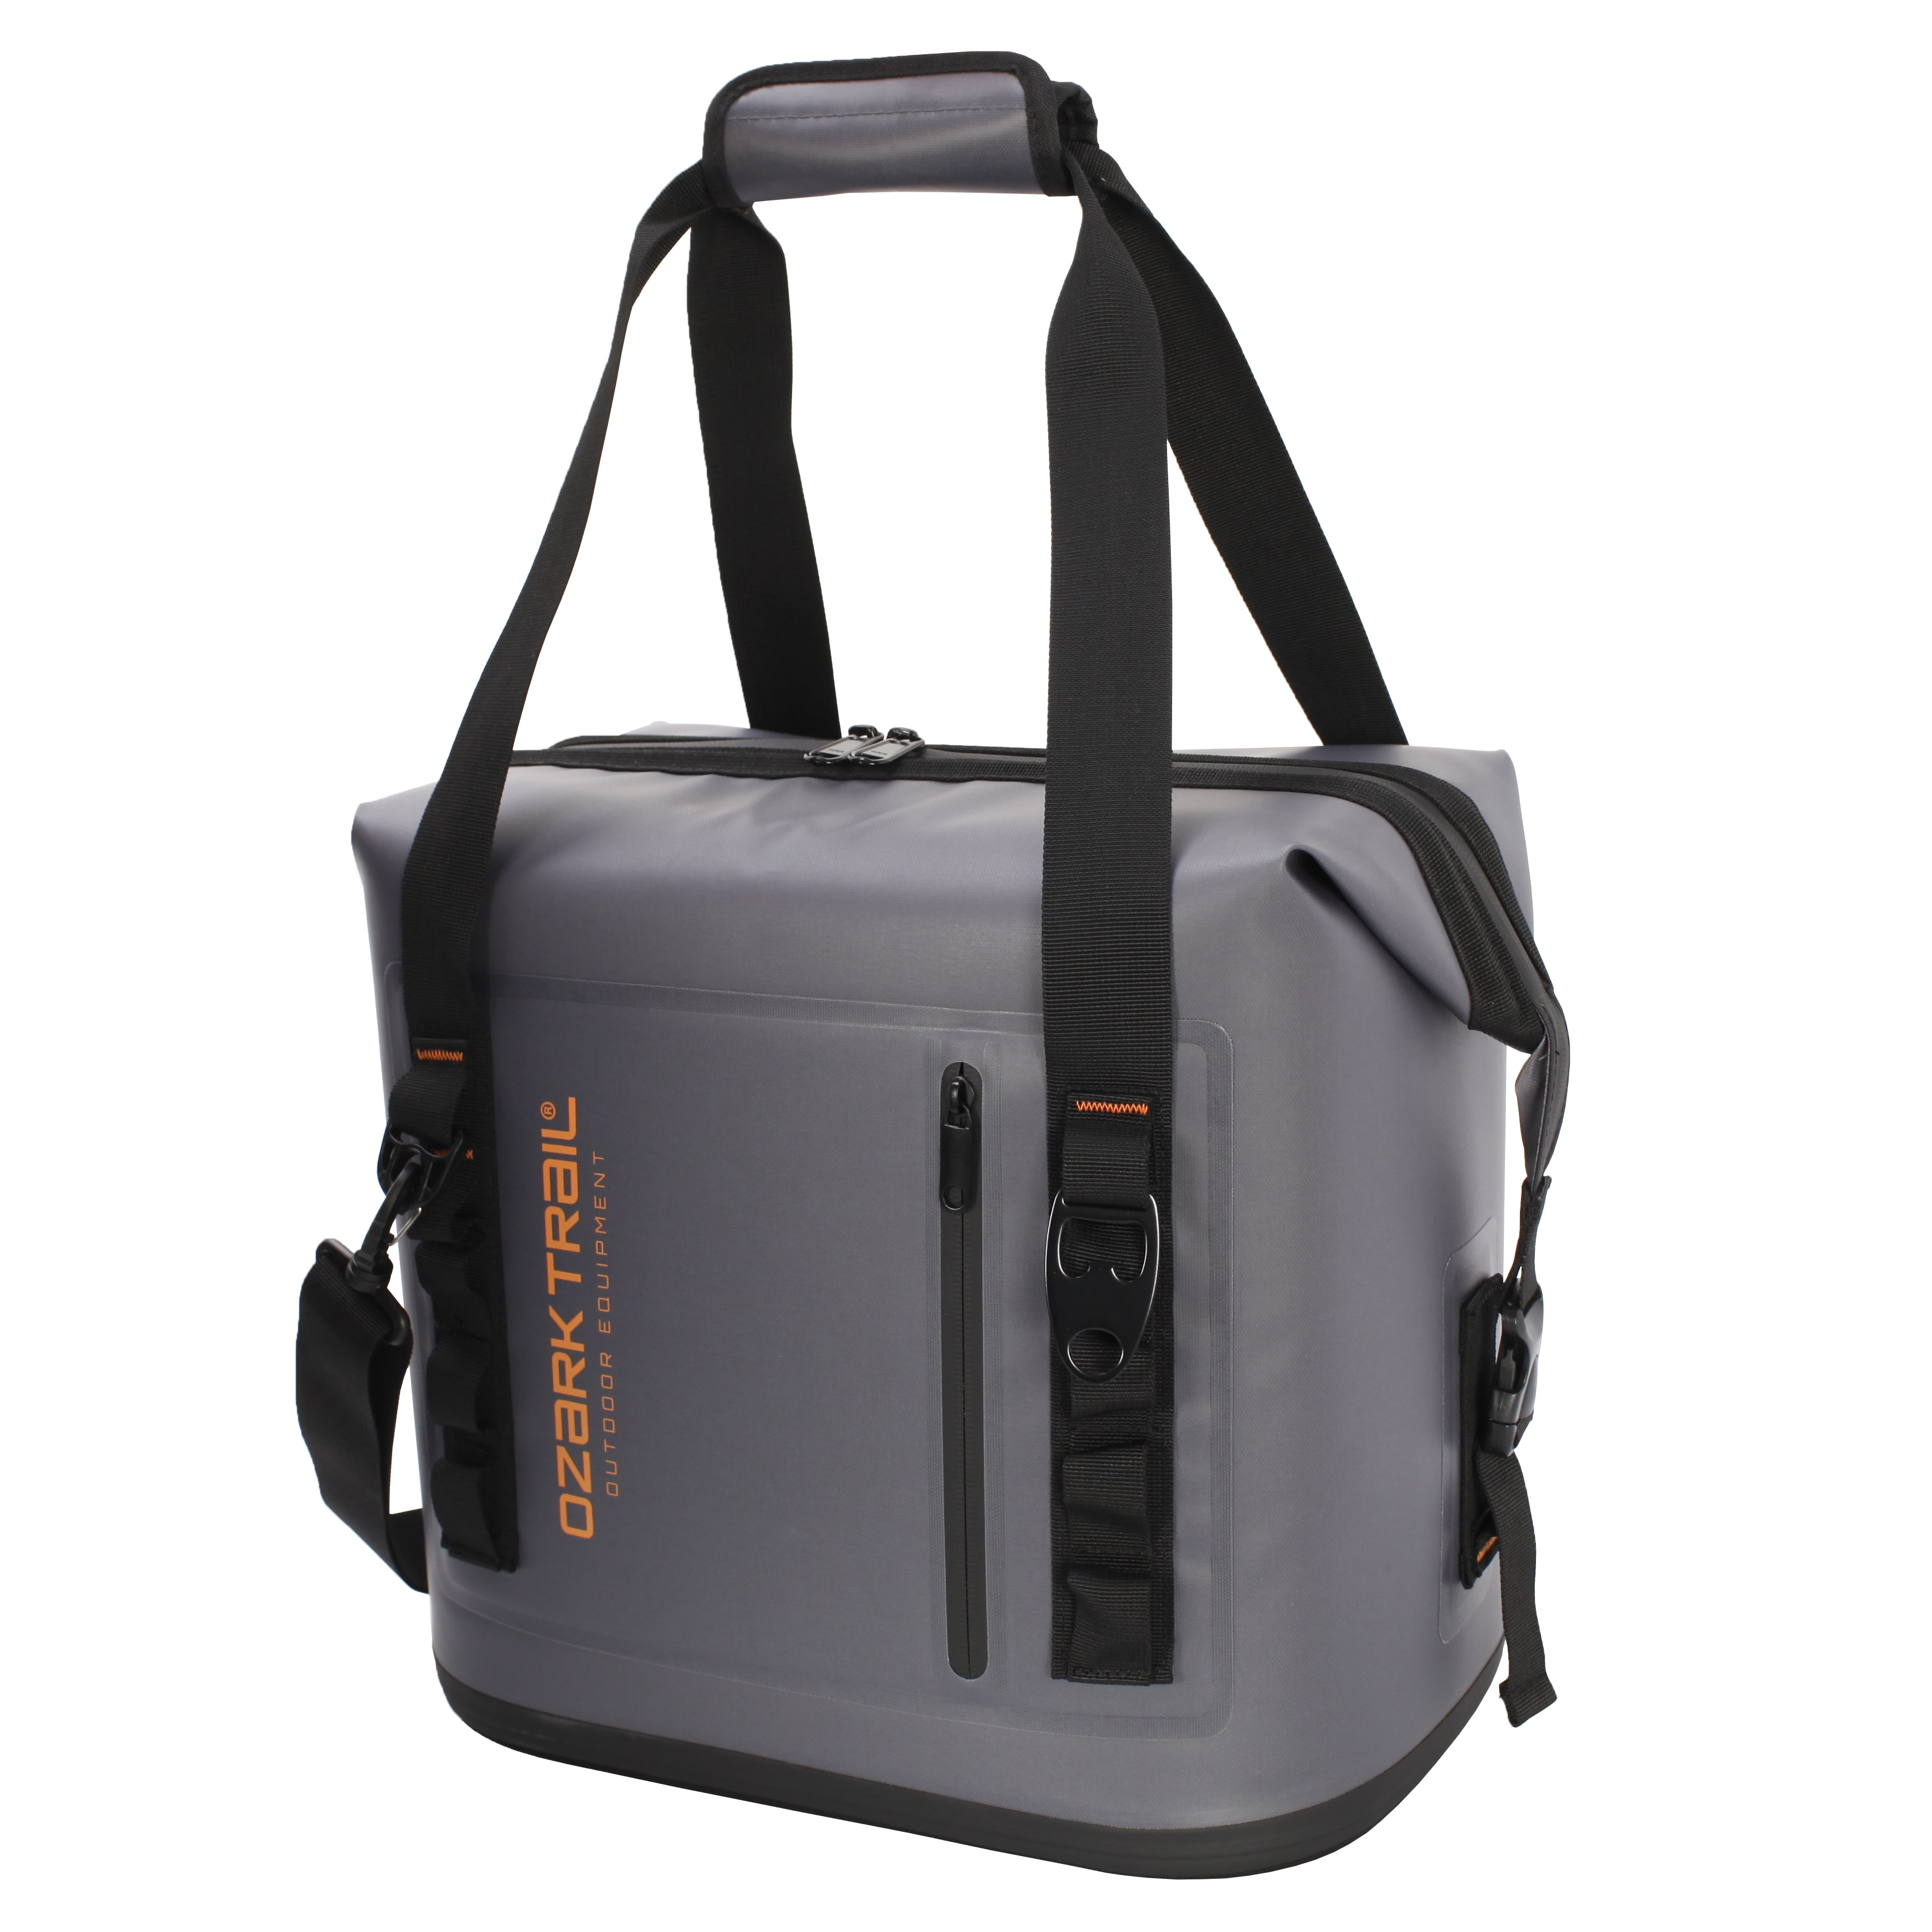 ozark-trail-premium-24-can-cooler-sports-outdoors-outdoor-recreation